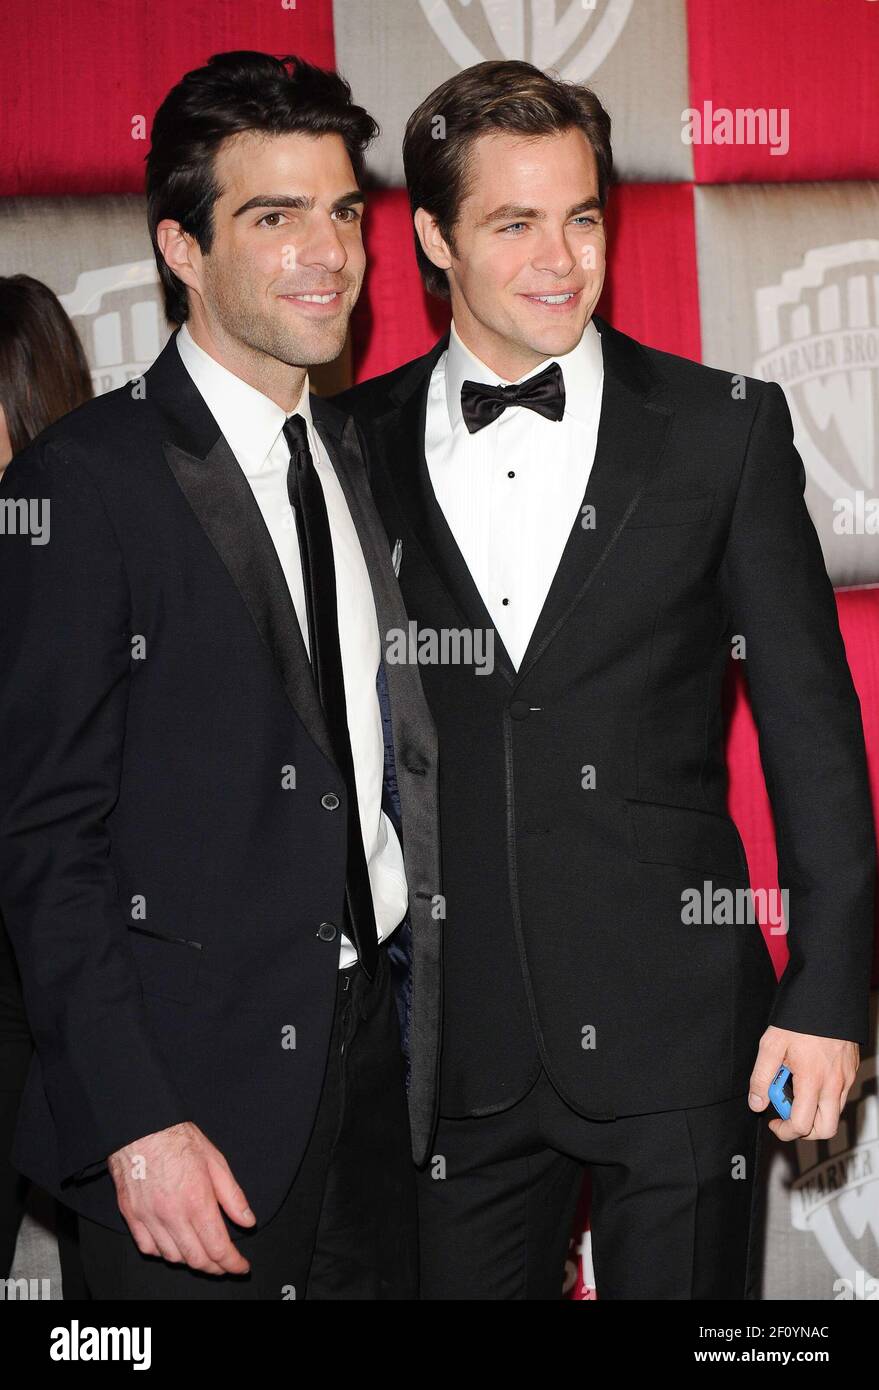 Zachary Quinto and Chris Pine. 11 January 2009, California. The 66th Golden  Globe Awards - In Style Warner Brothers Party held at The Beverly Hilton  Hotel. Photo Credit: Giulio Marcocchi/Sipa Press./InStyleG gm.186/0901122155